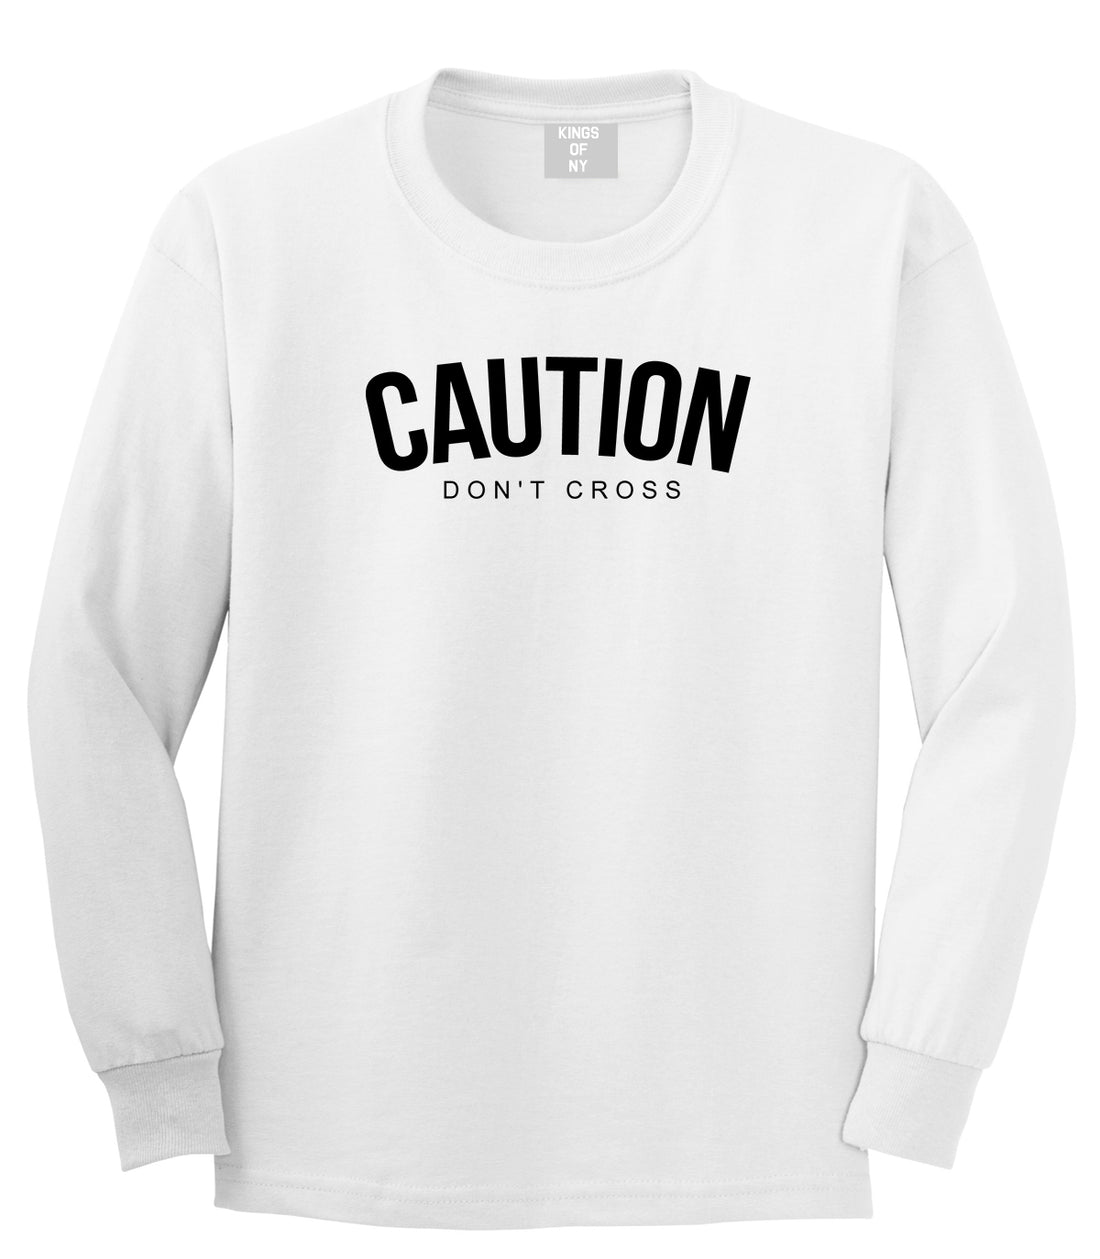 Caution Dont Cross Mens Long Sleeve T-Shirt White by Kings Of NY